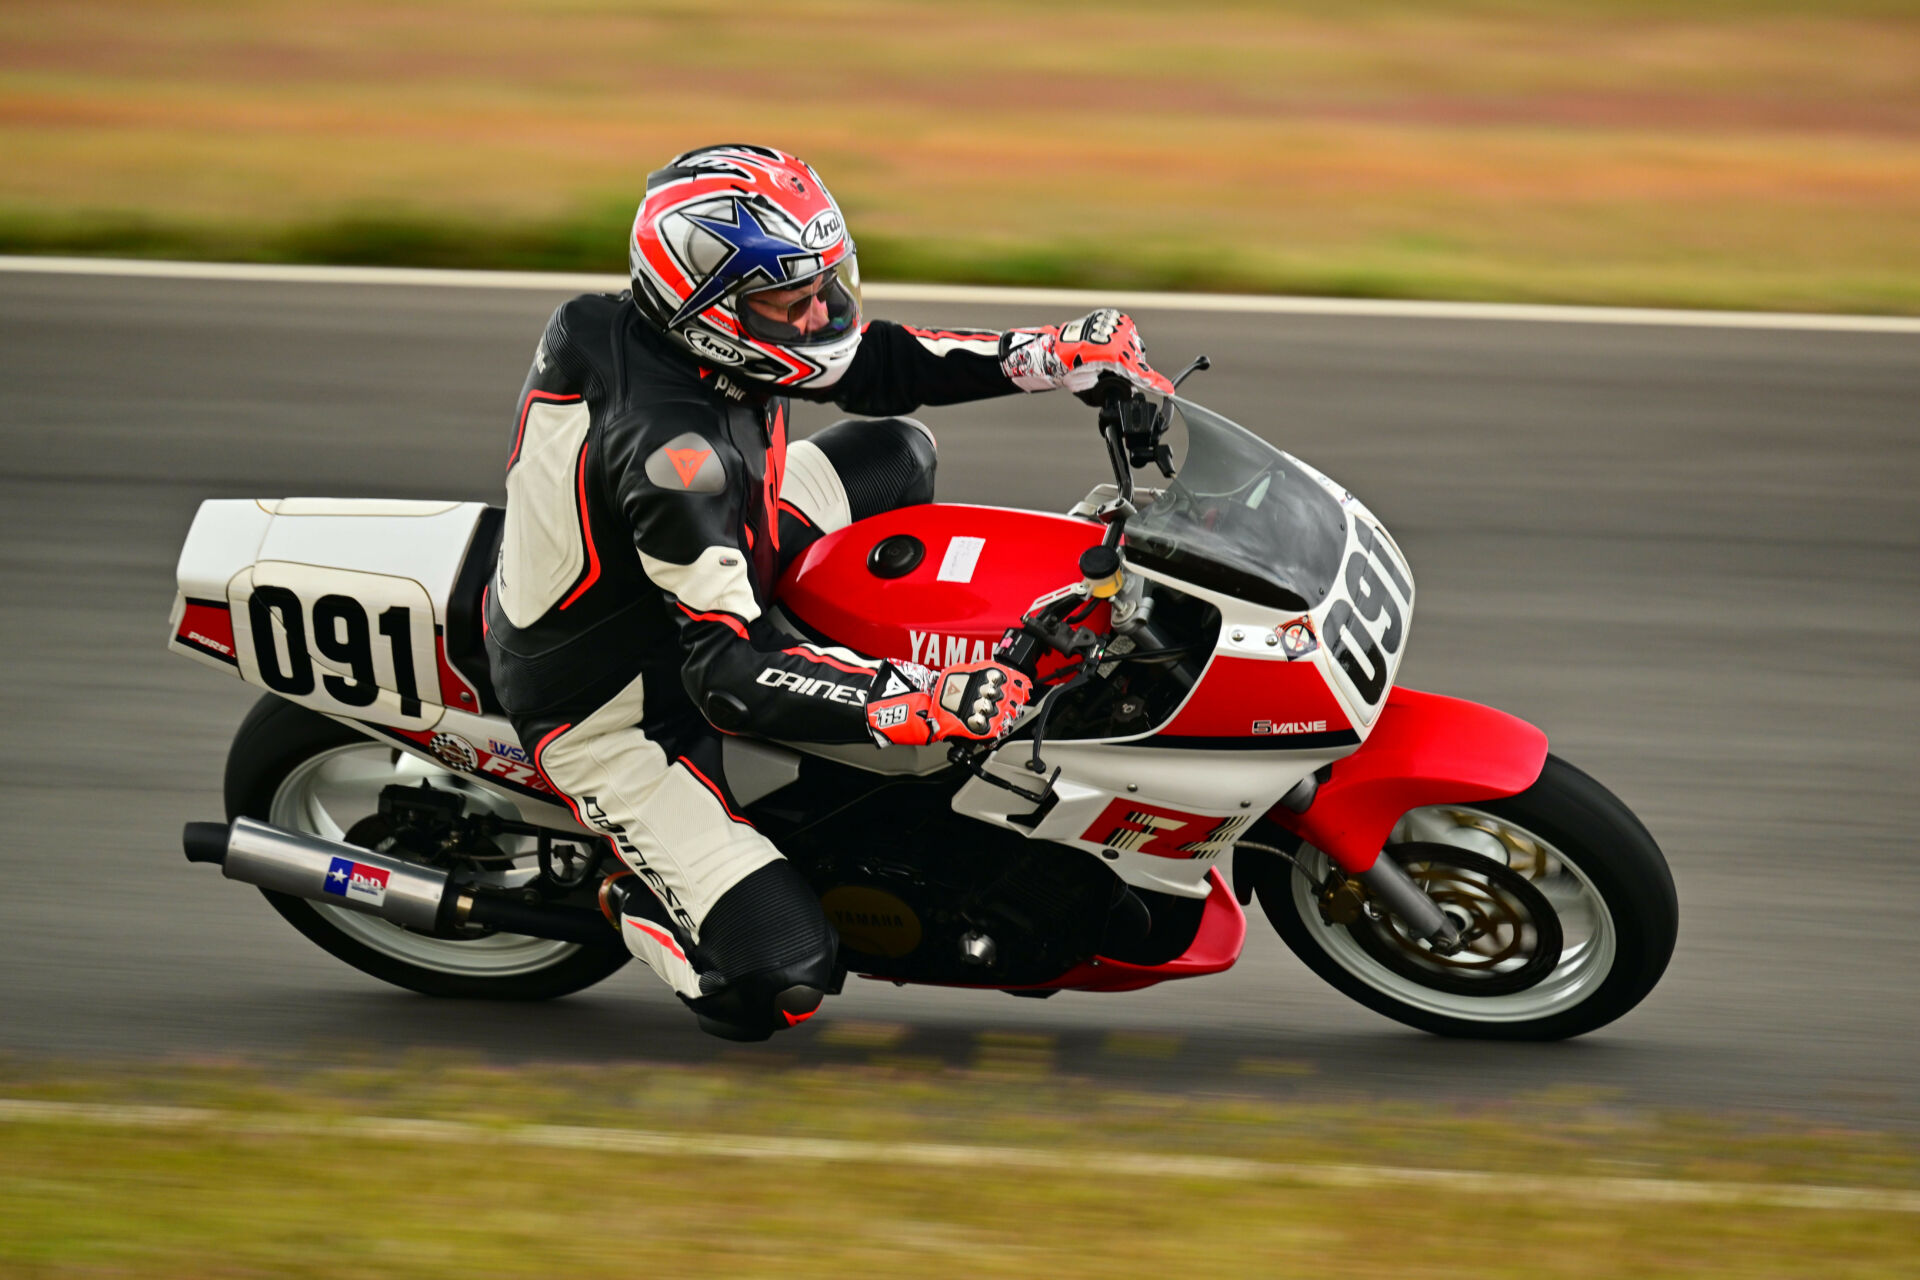 Craig Beecher (091), seen here riding a Yamaha FZR750, took the new racer school at the weather-affected Willow Springs Grand Prix. Photo by CaliPhotography.com, courtesy Willow Springs Grand Prix.